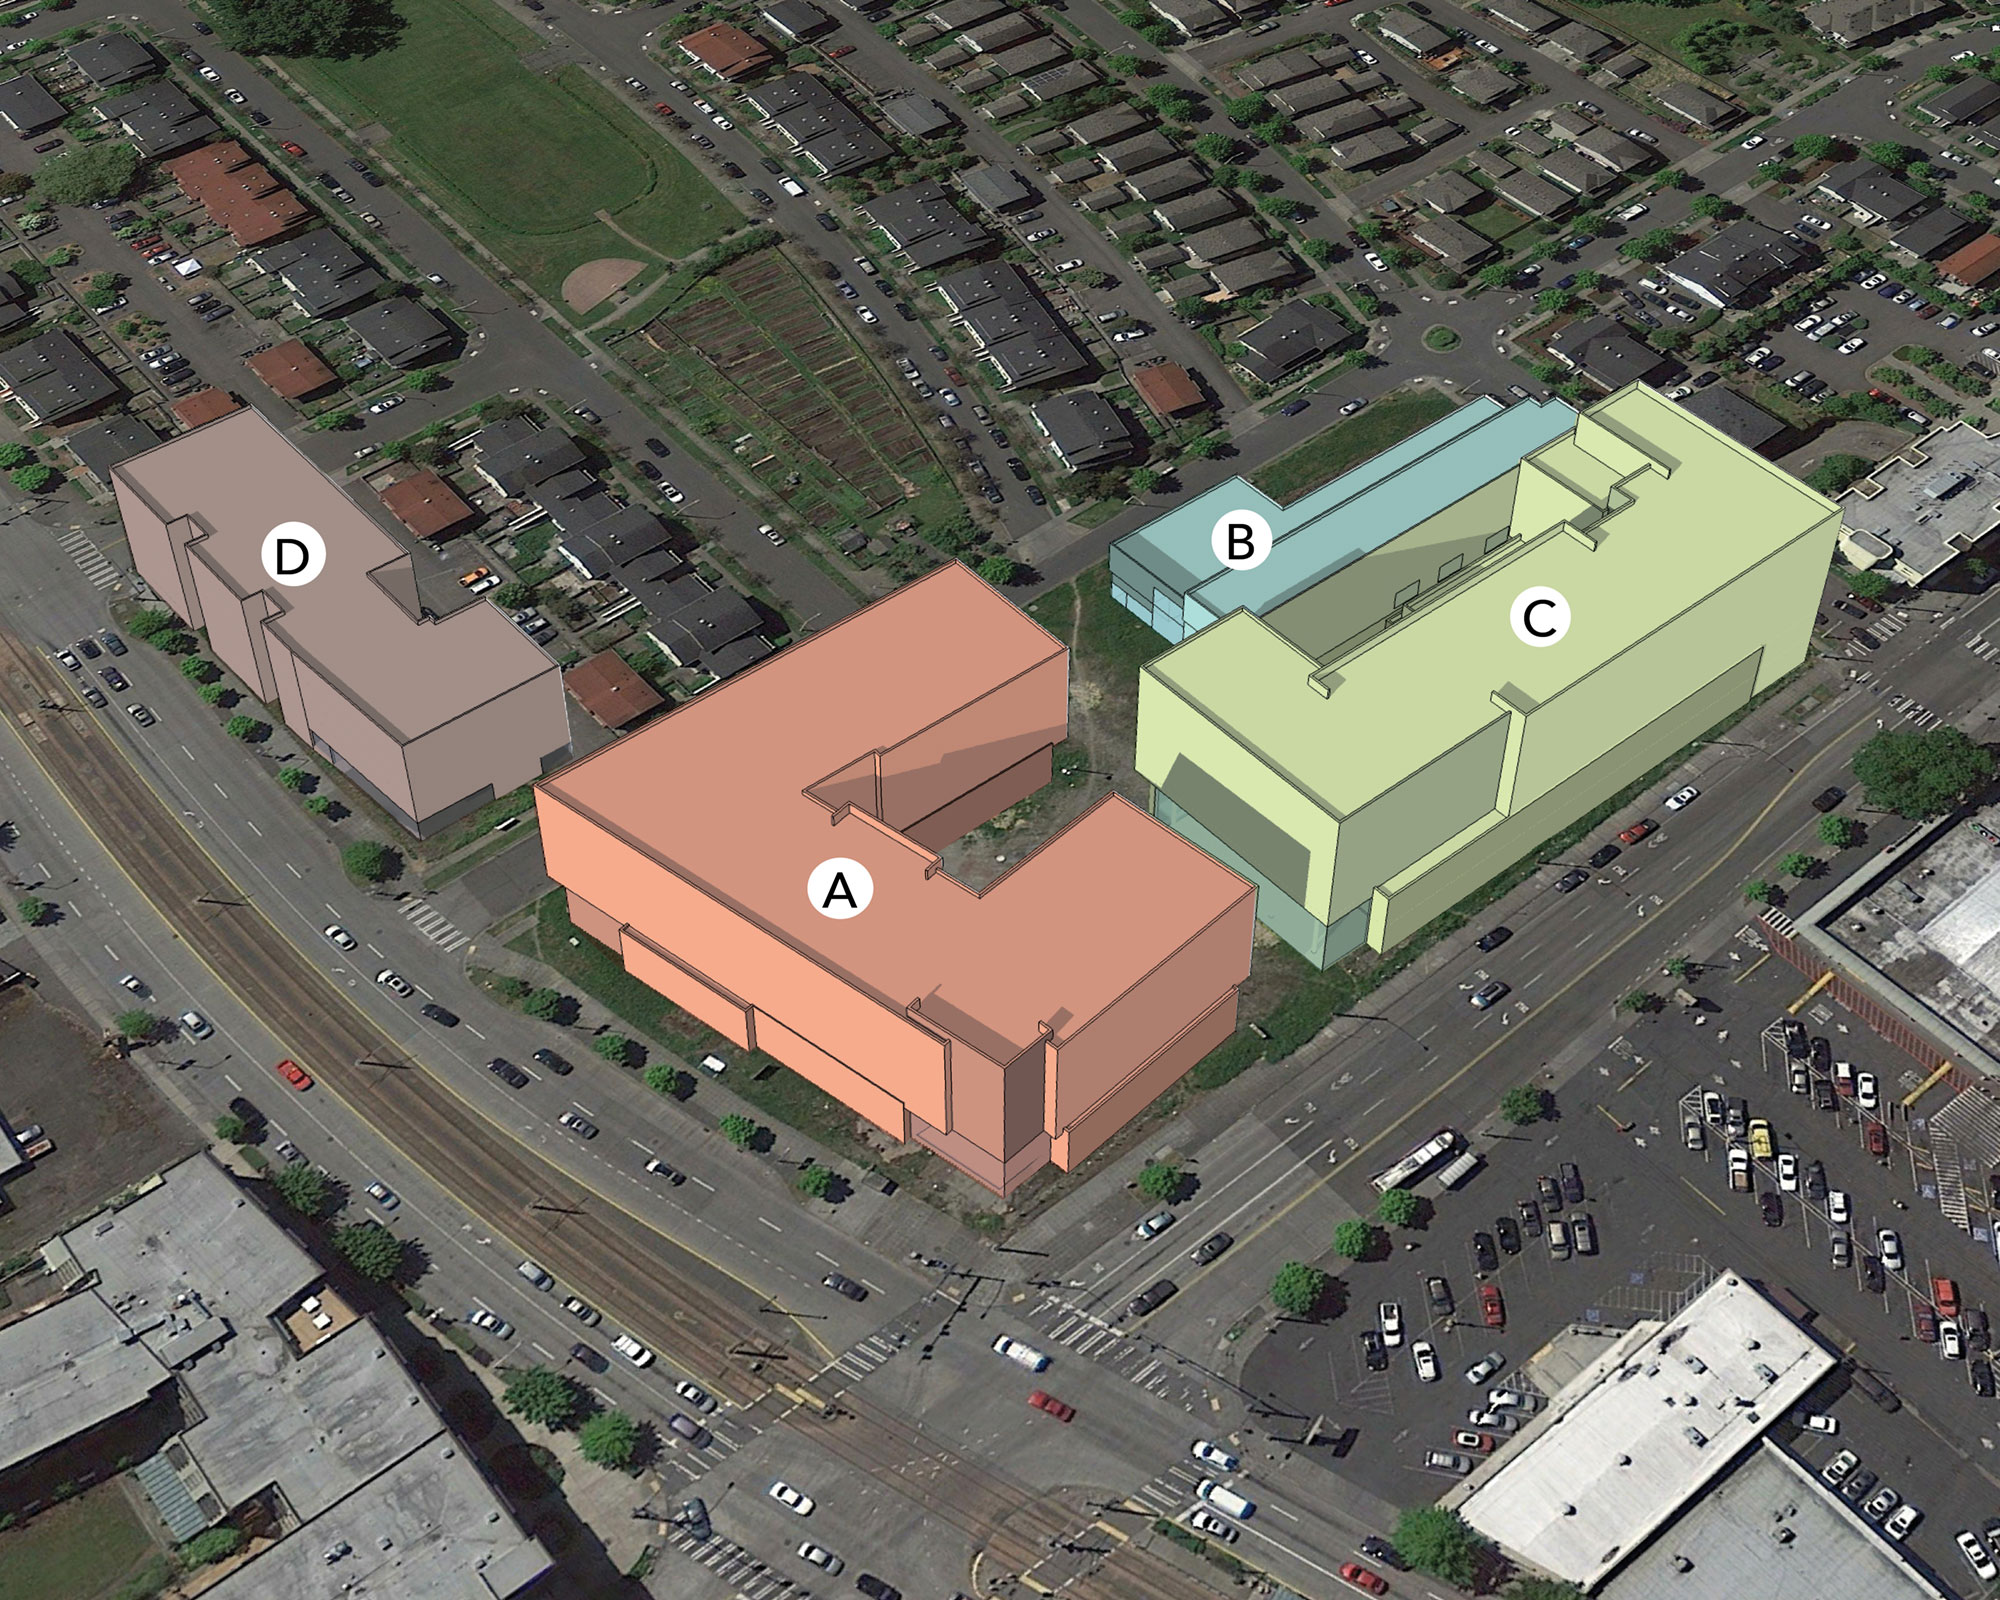 Rendering of Othello Square with the four buildings labeled